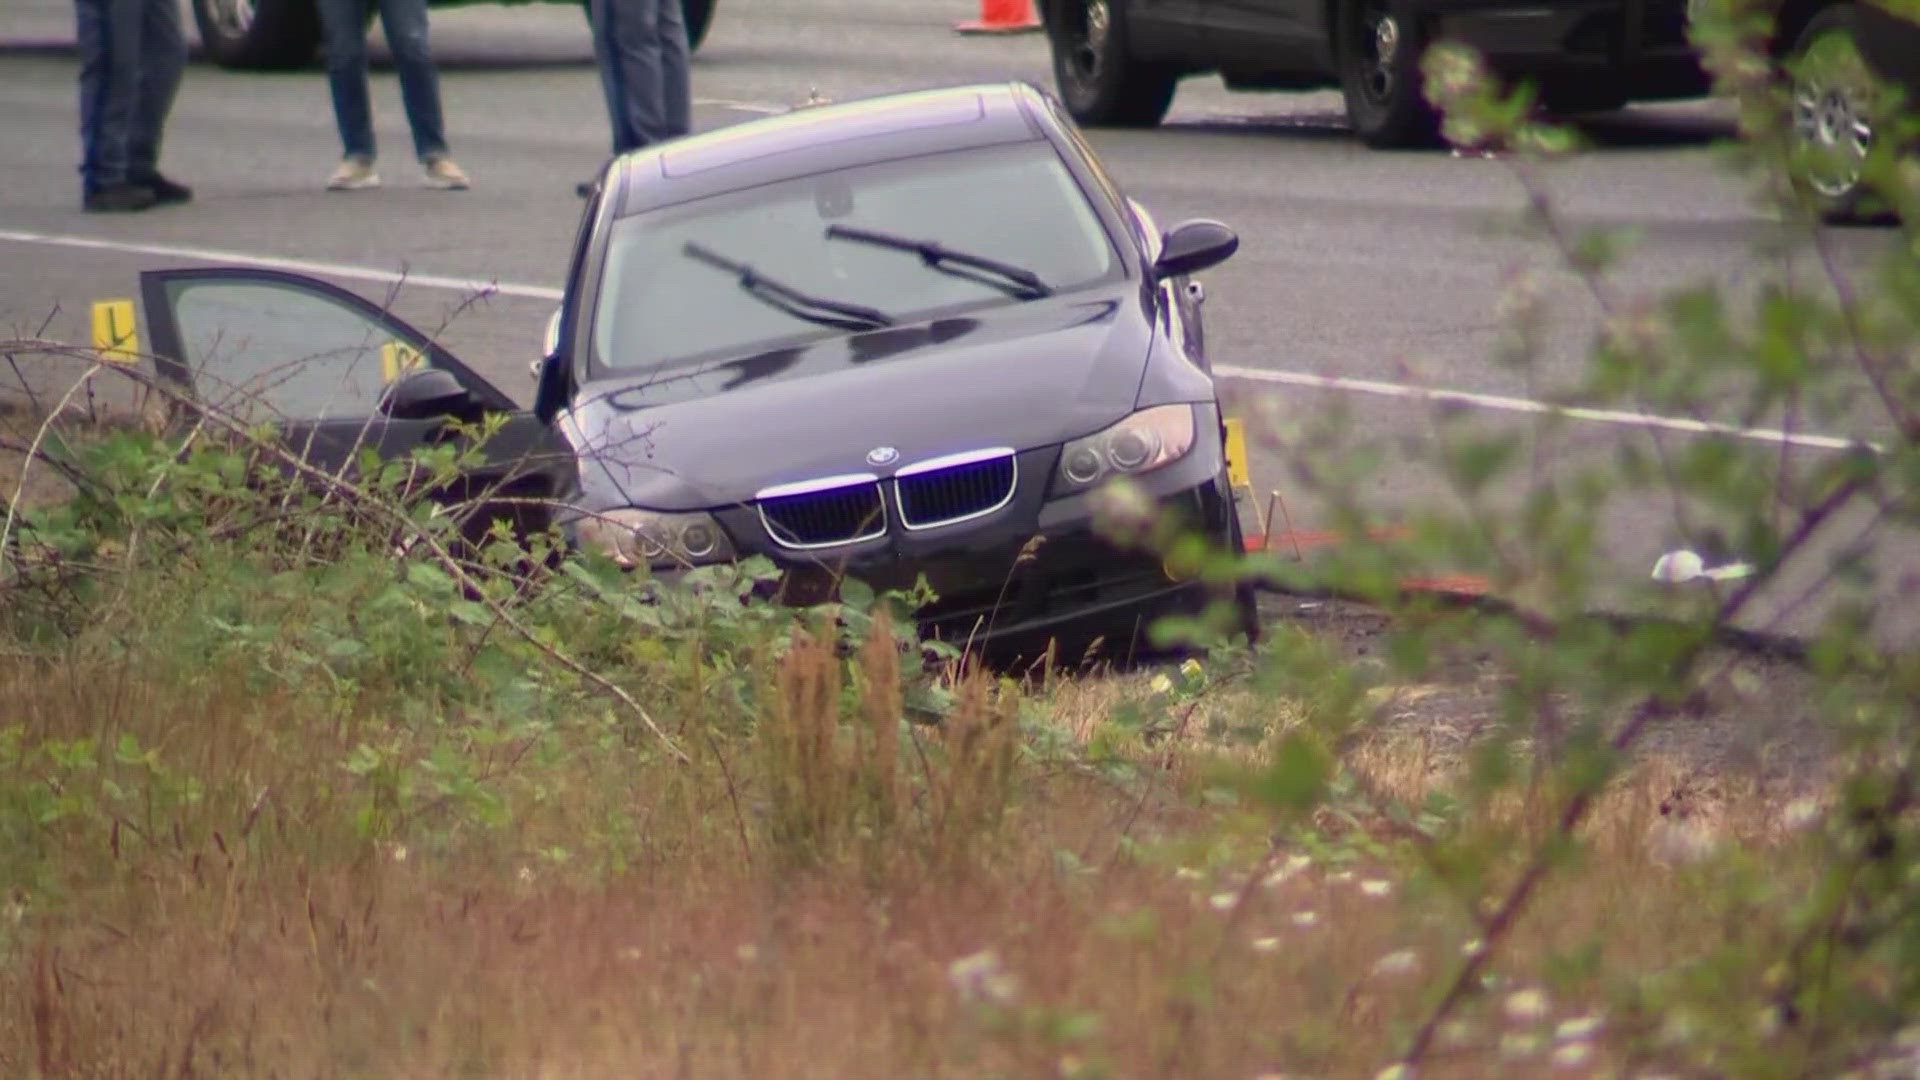 The driver of a BMW died from a stab wound to the neck on June 26 during the violent incident near the SeaTac Rest Area.